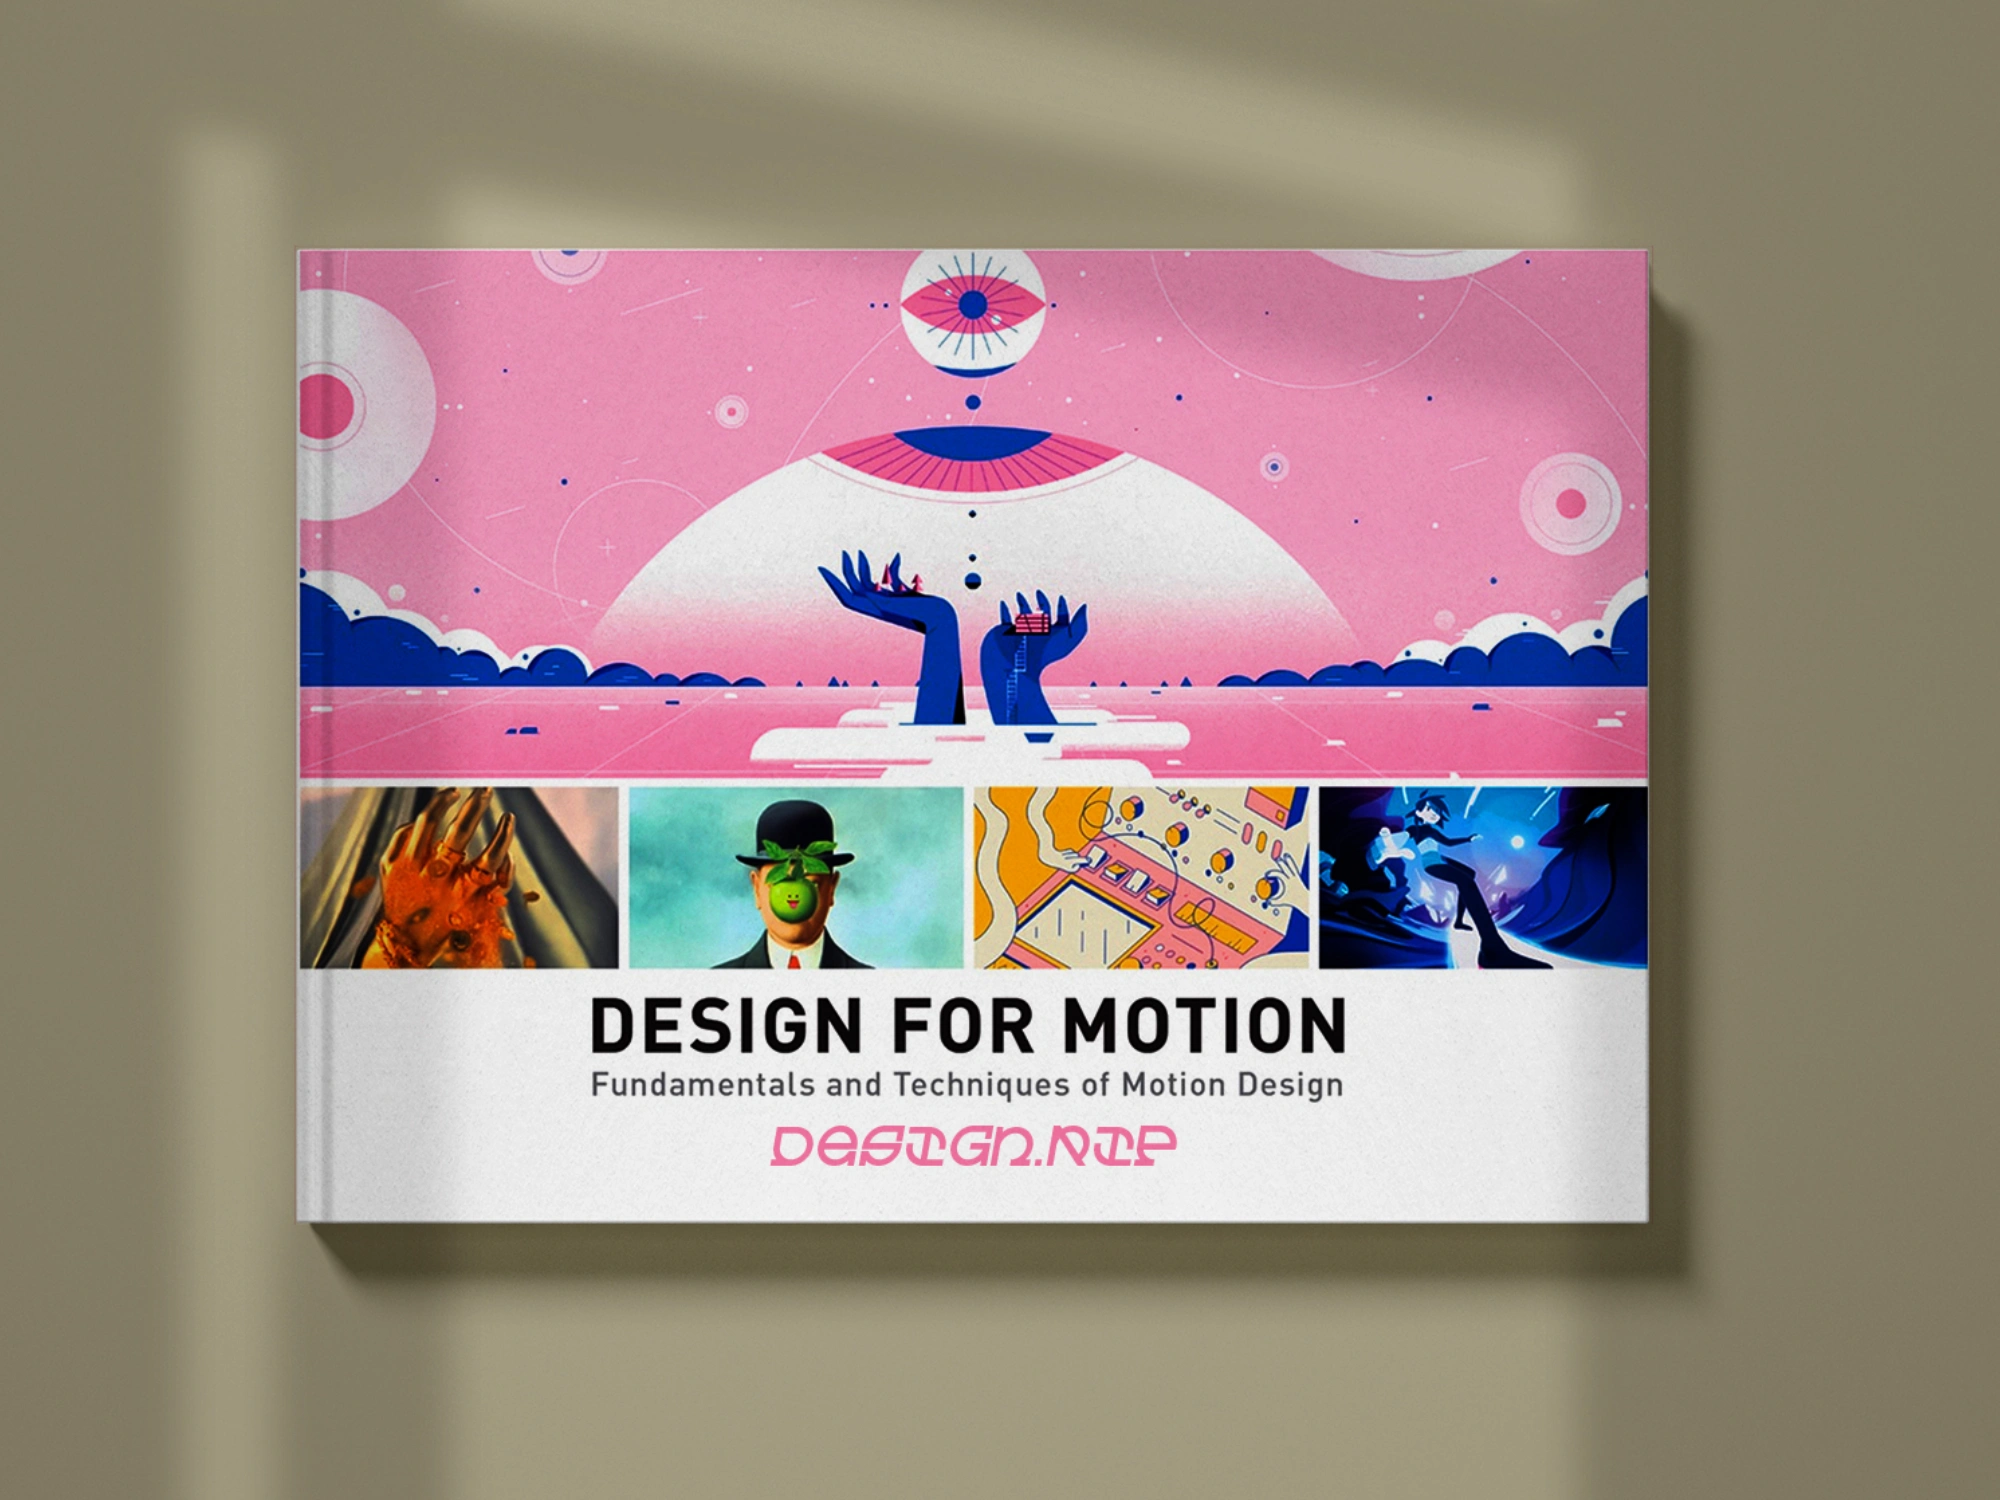 [VIP] Design for Motion: Fundamentals and Techniques of Motion Design